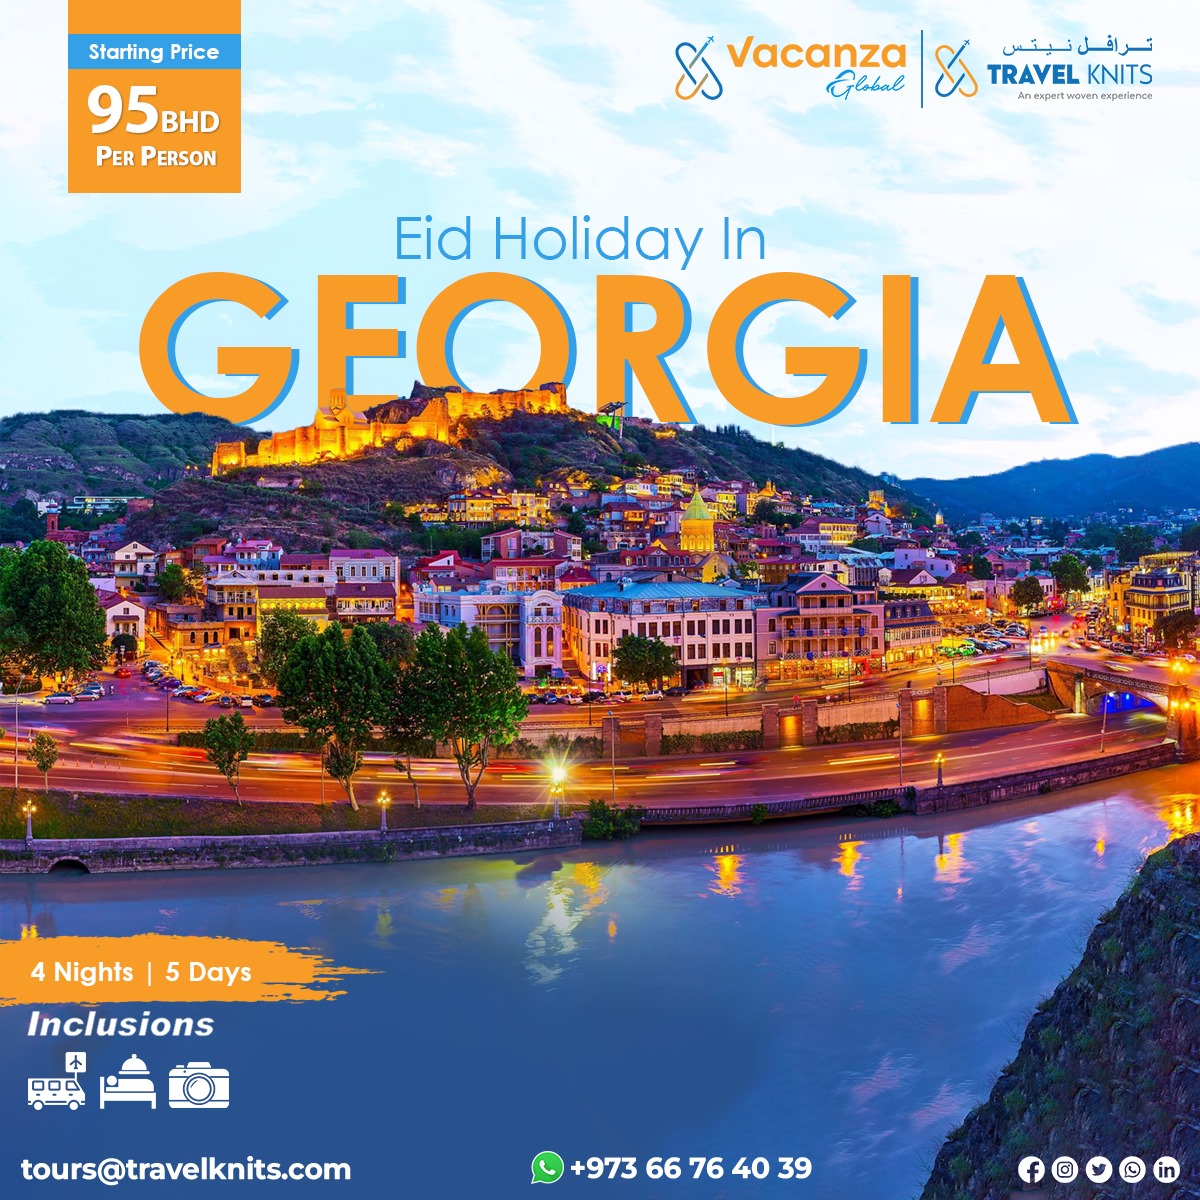 Eid holiday in georgiaTour Packages - Book honeymoon ,family,adventure tour packages to Eid holiday in georgia|Travel Knits